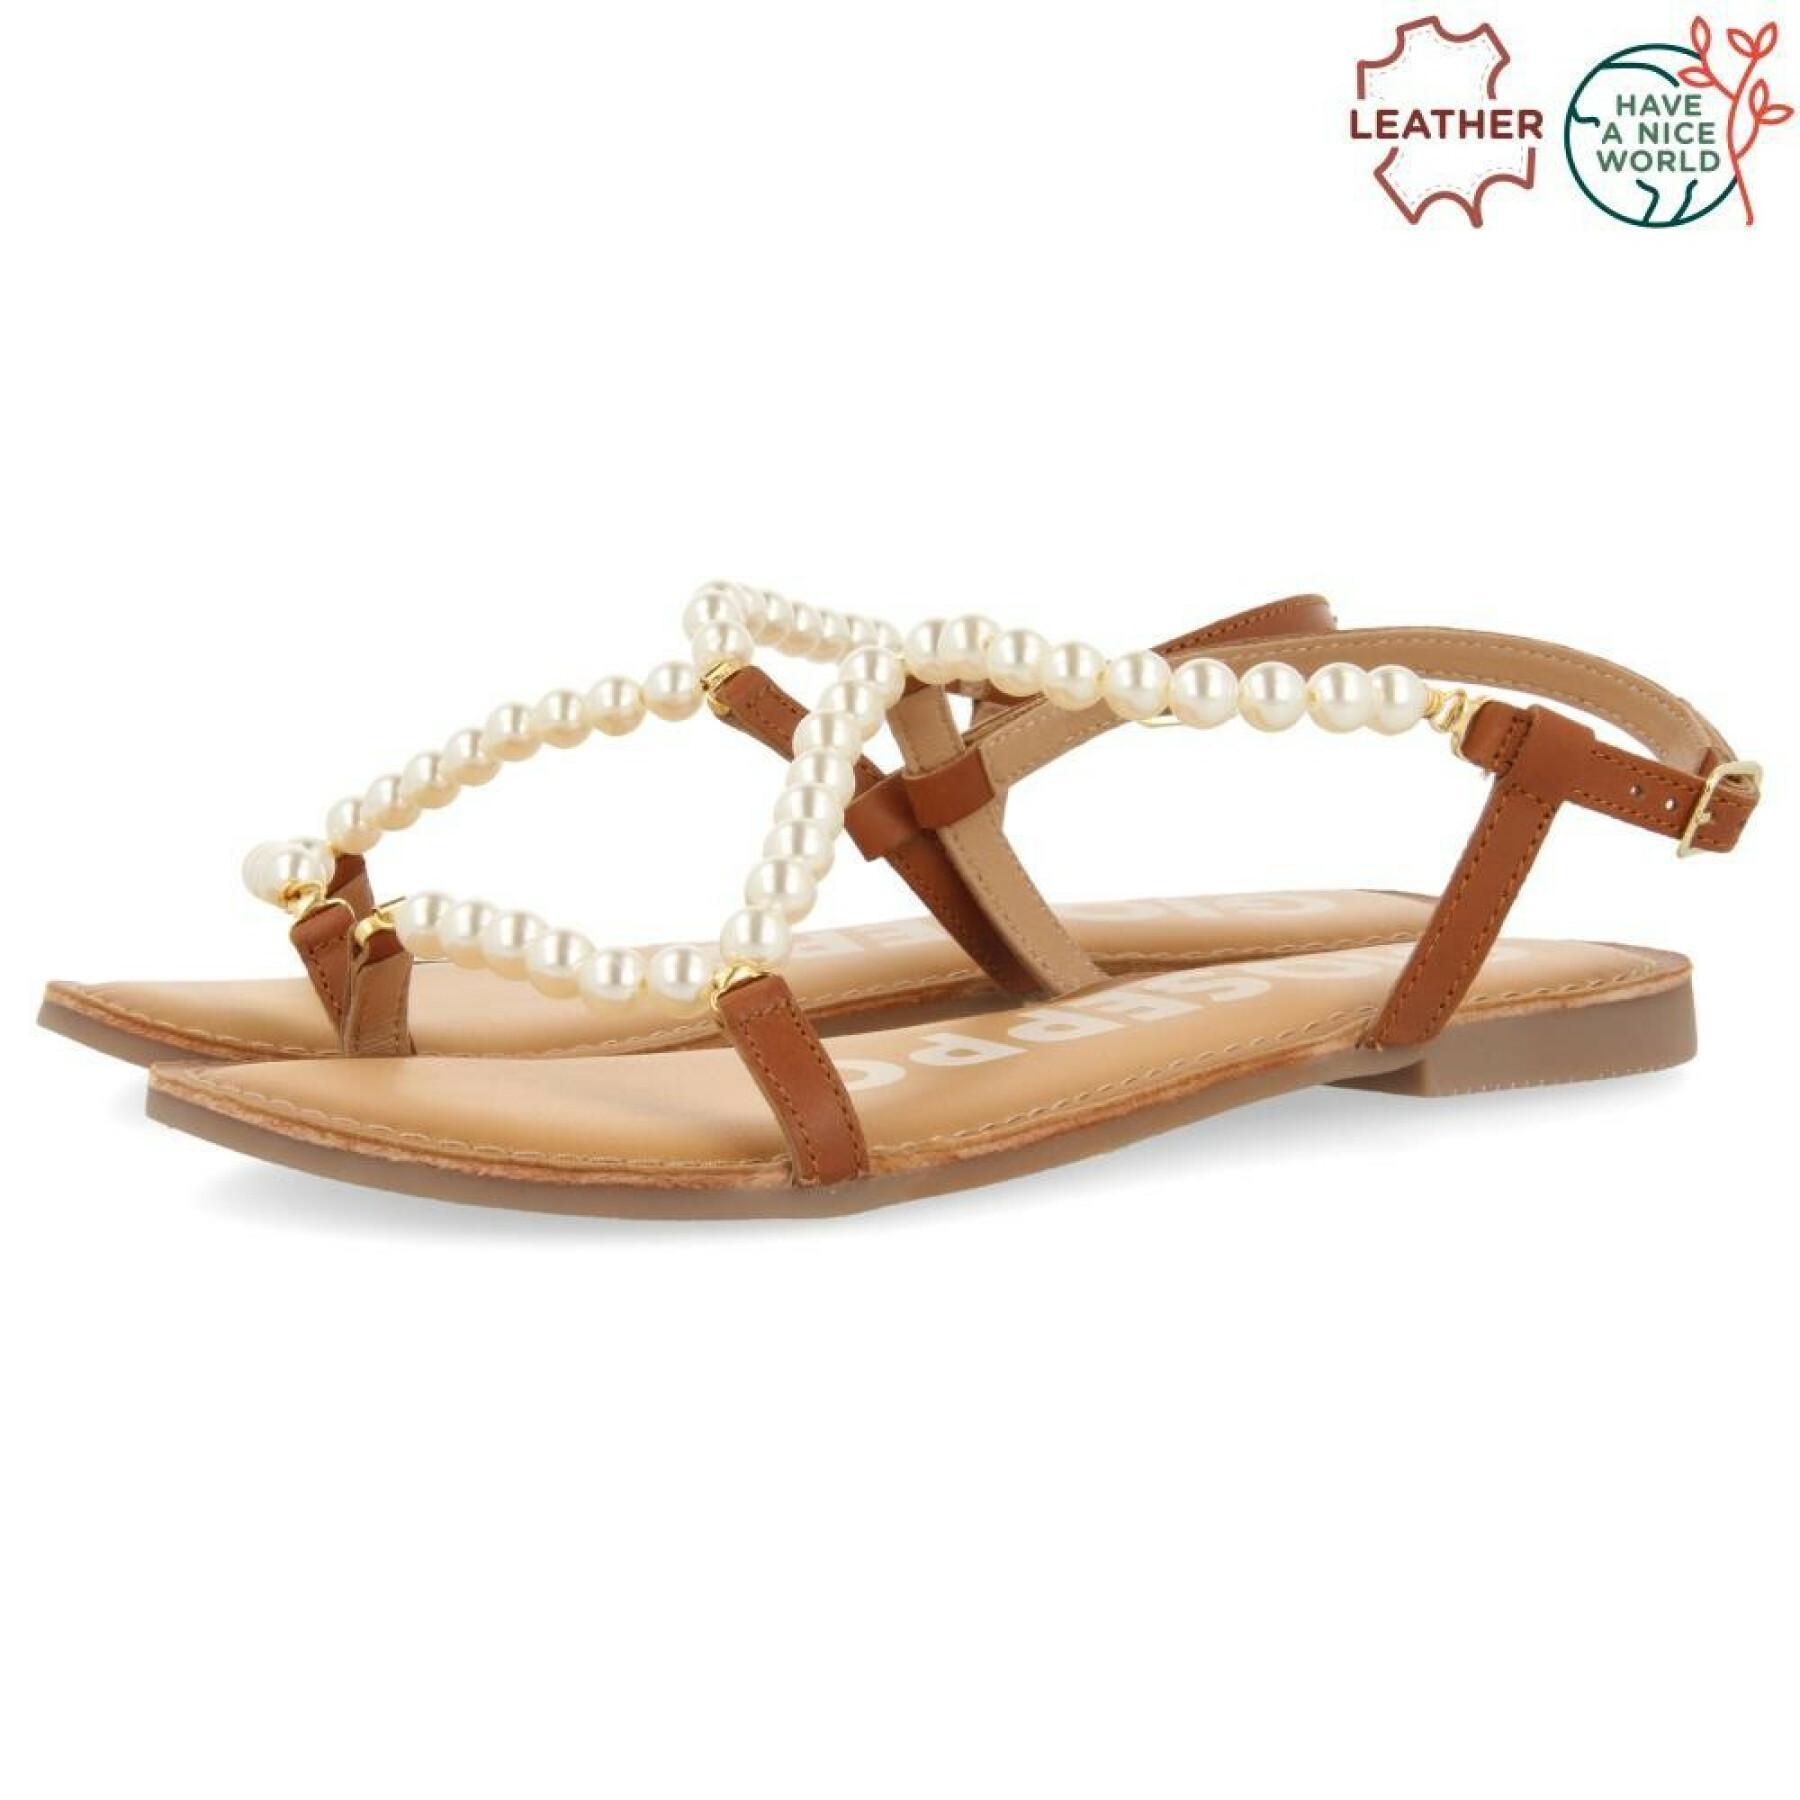 Women's nude sandals Gioseppo Arion